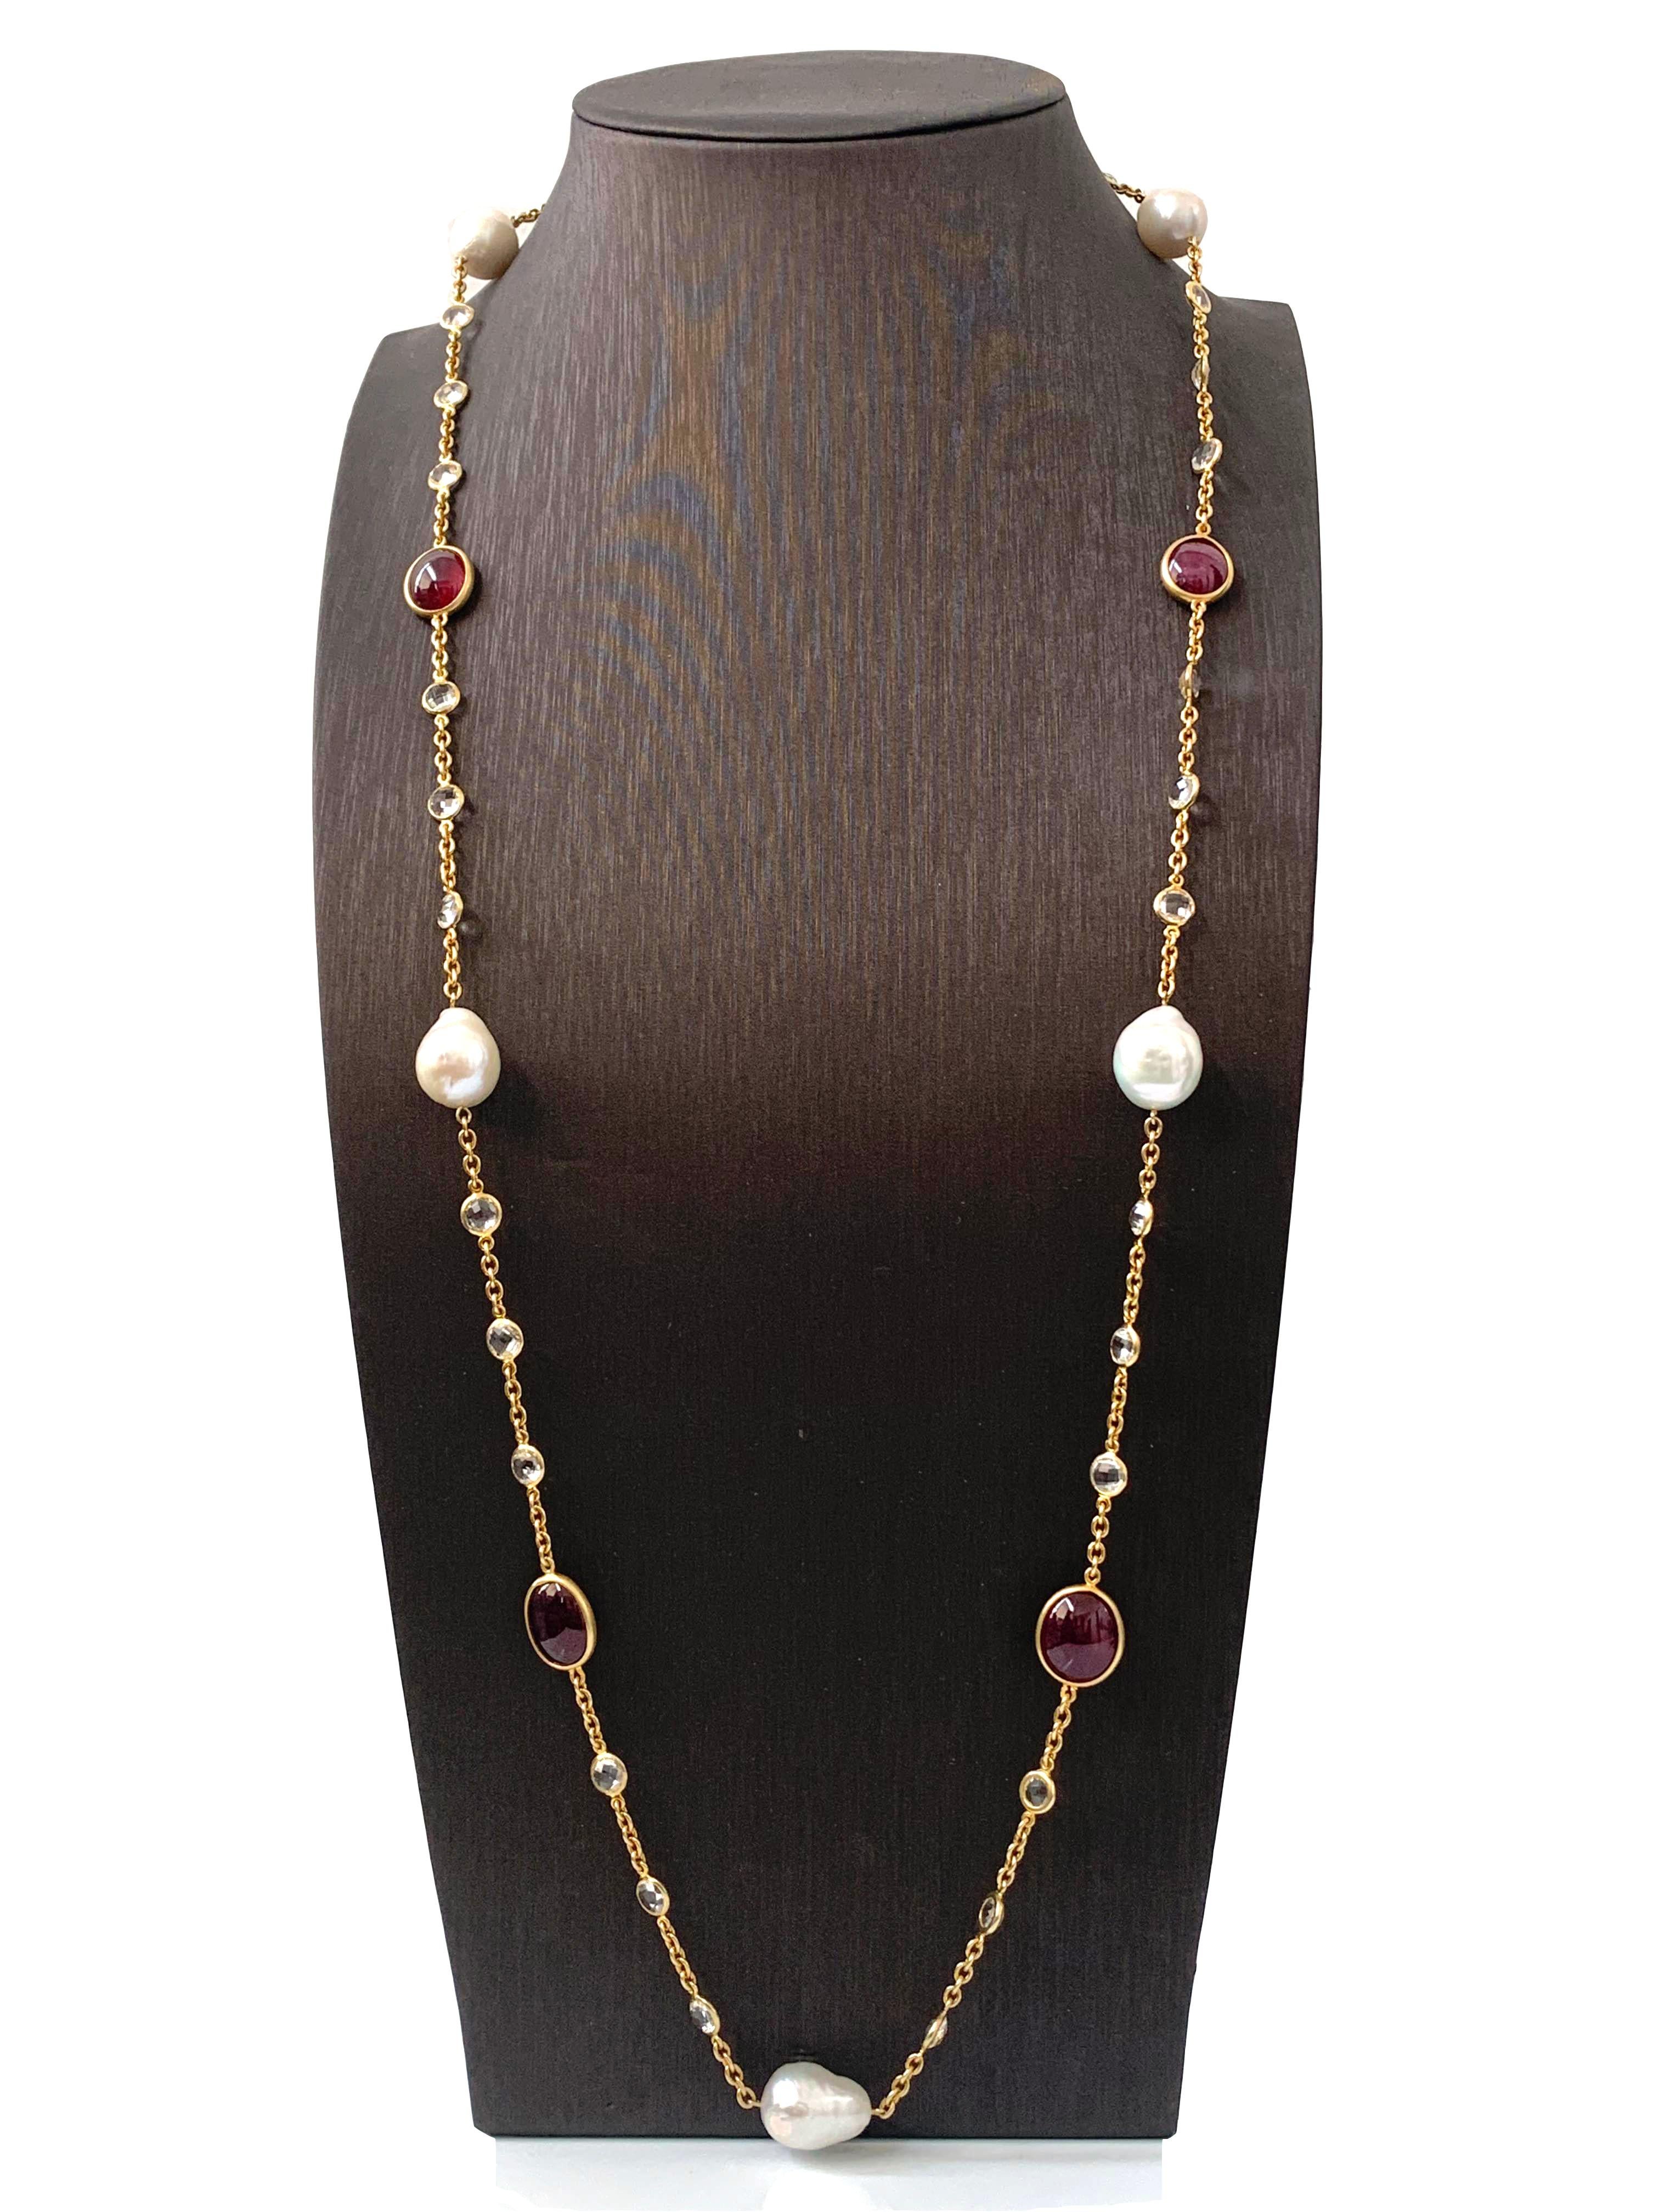 Contemporary Genuine Ruby, Cultured Baroque Pearl, and White Topaz Long Station Necklace.

The necklace features 4 beautiful pink-ish oval cabochon-cut genuine rubies (58 carats total weight), 5 high-luster genuine cultured baroque pearls, and 30